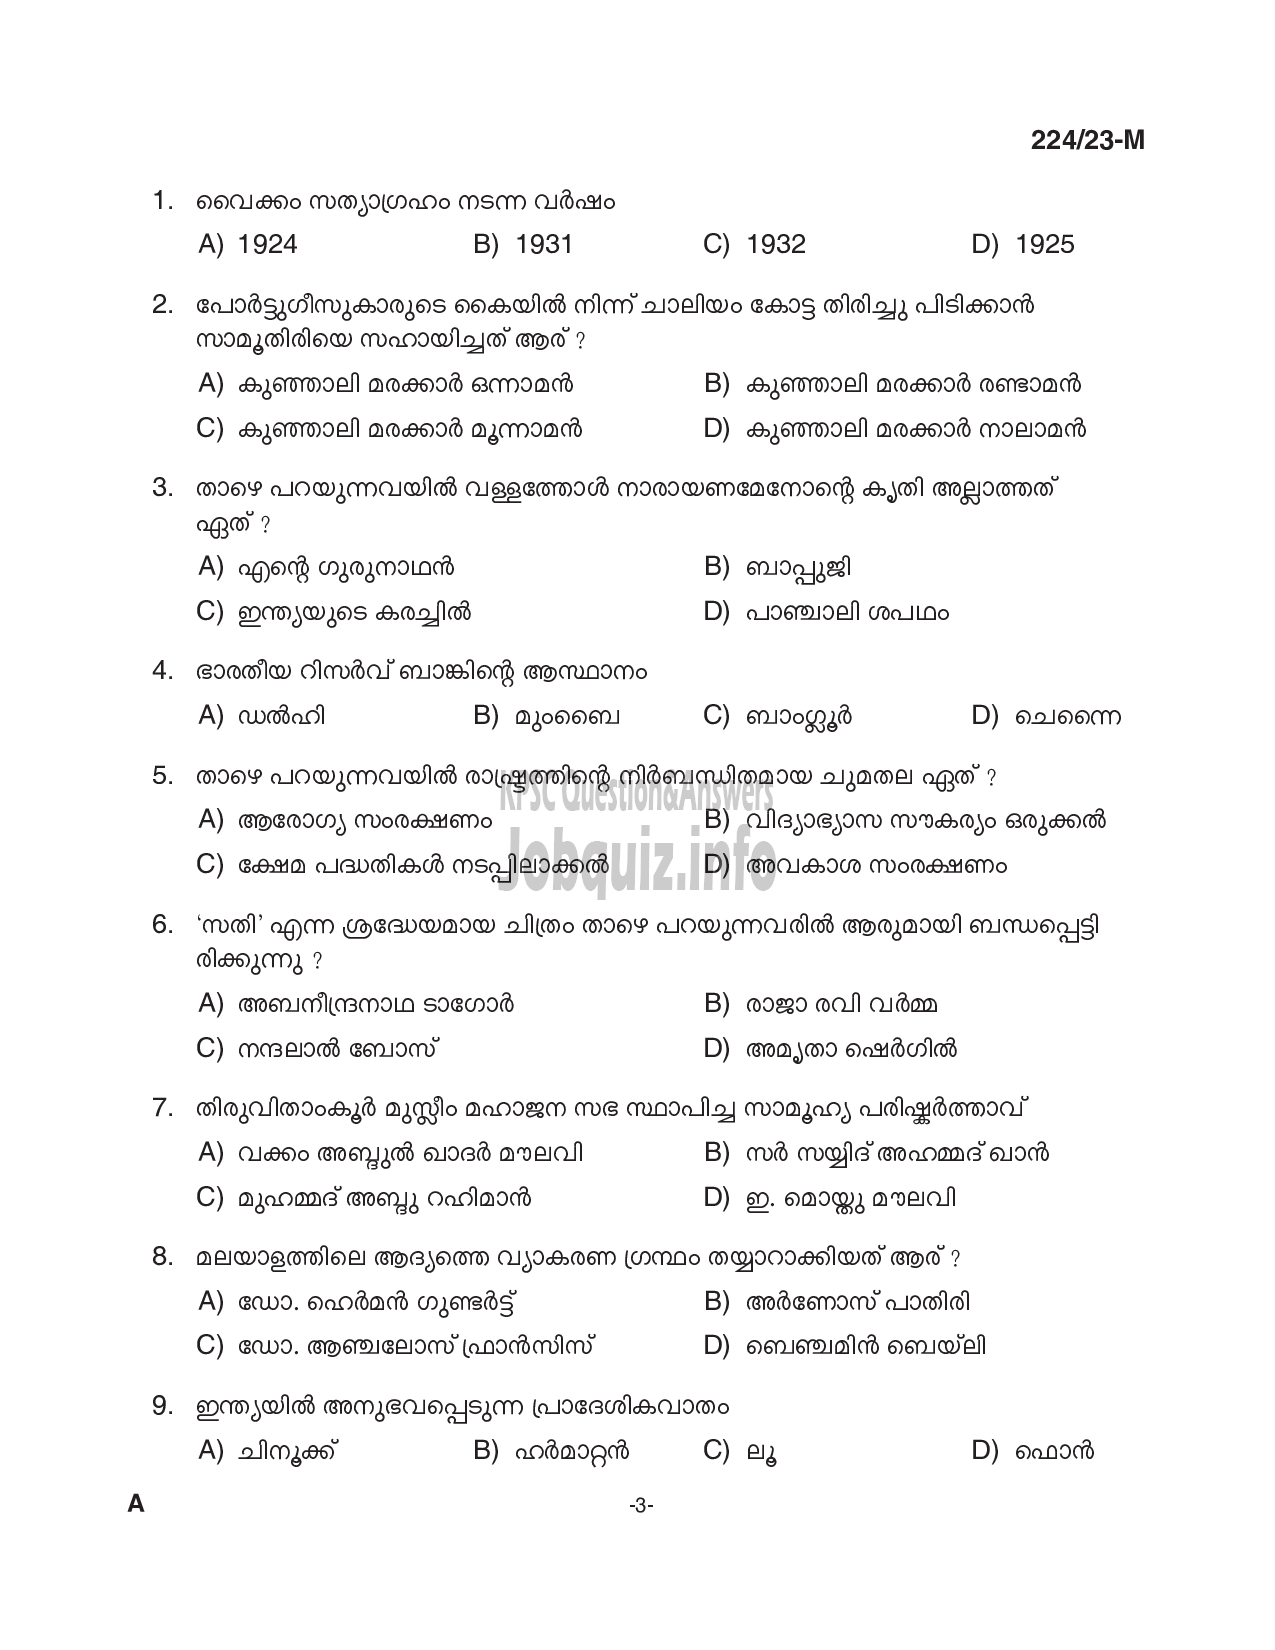 Kerala PSC Question Paper -  LD Clerk/ Accountant/ Cashier etc (Preliminary Examination- Stage II)-3